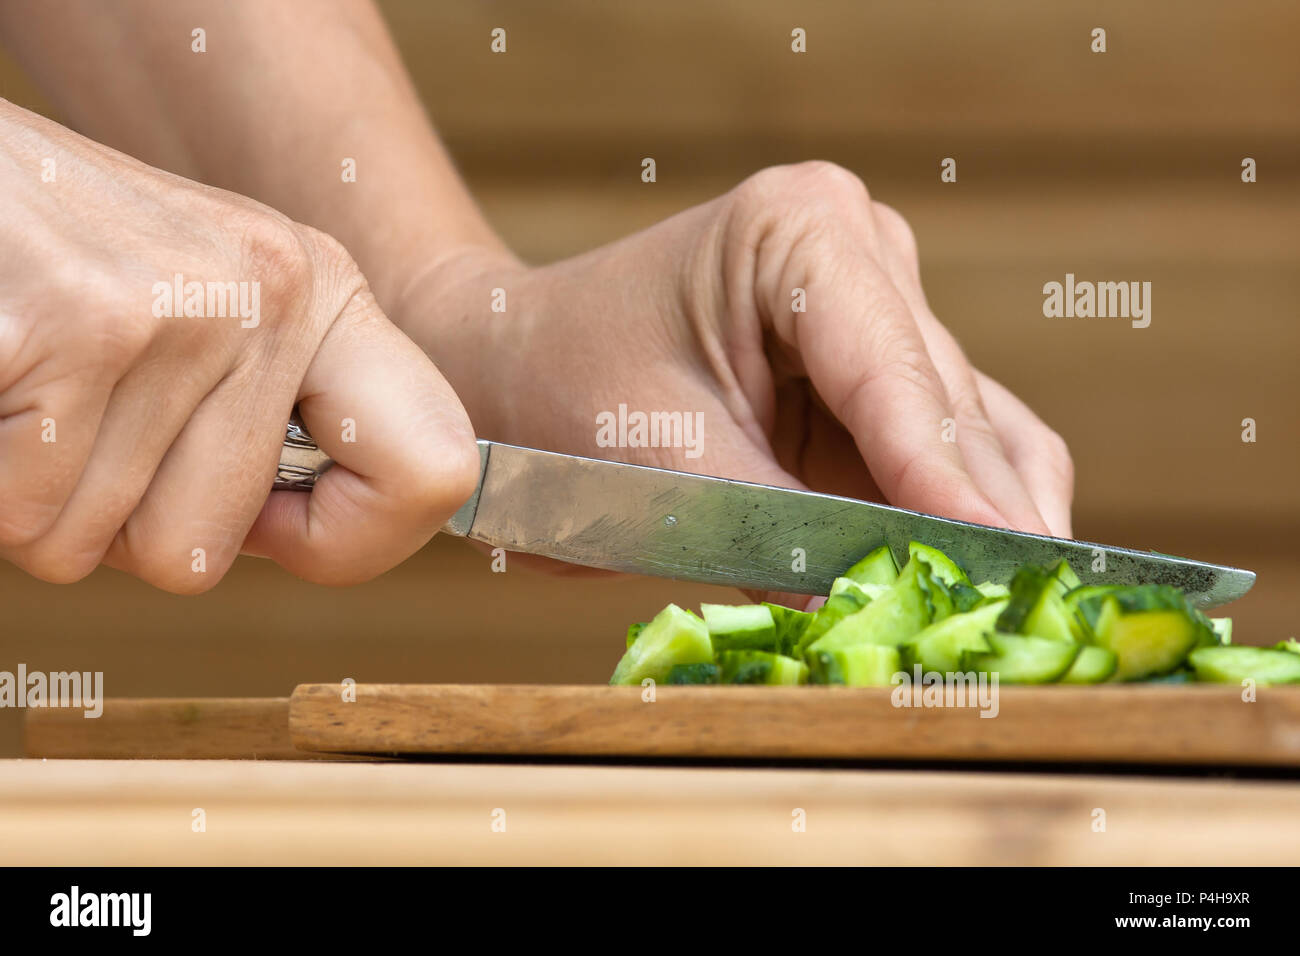 hands of woman slicing cucumber on the wooden cutting board Stock Photo